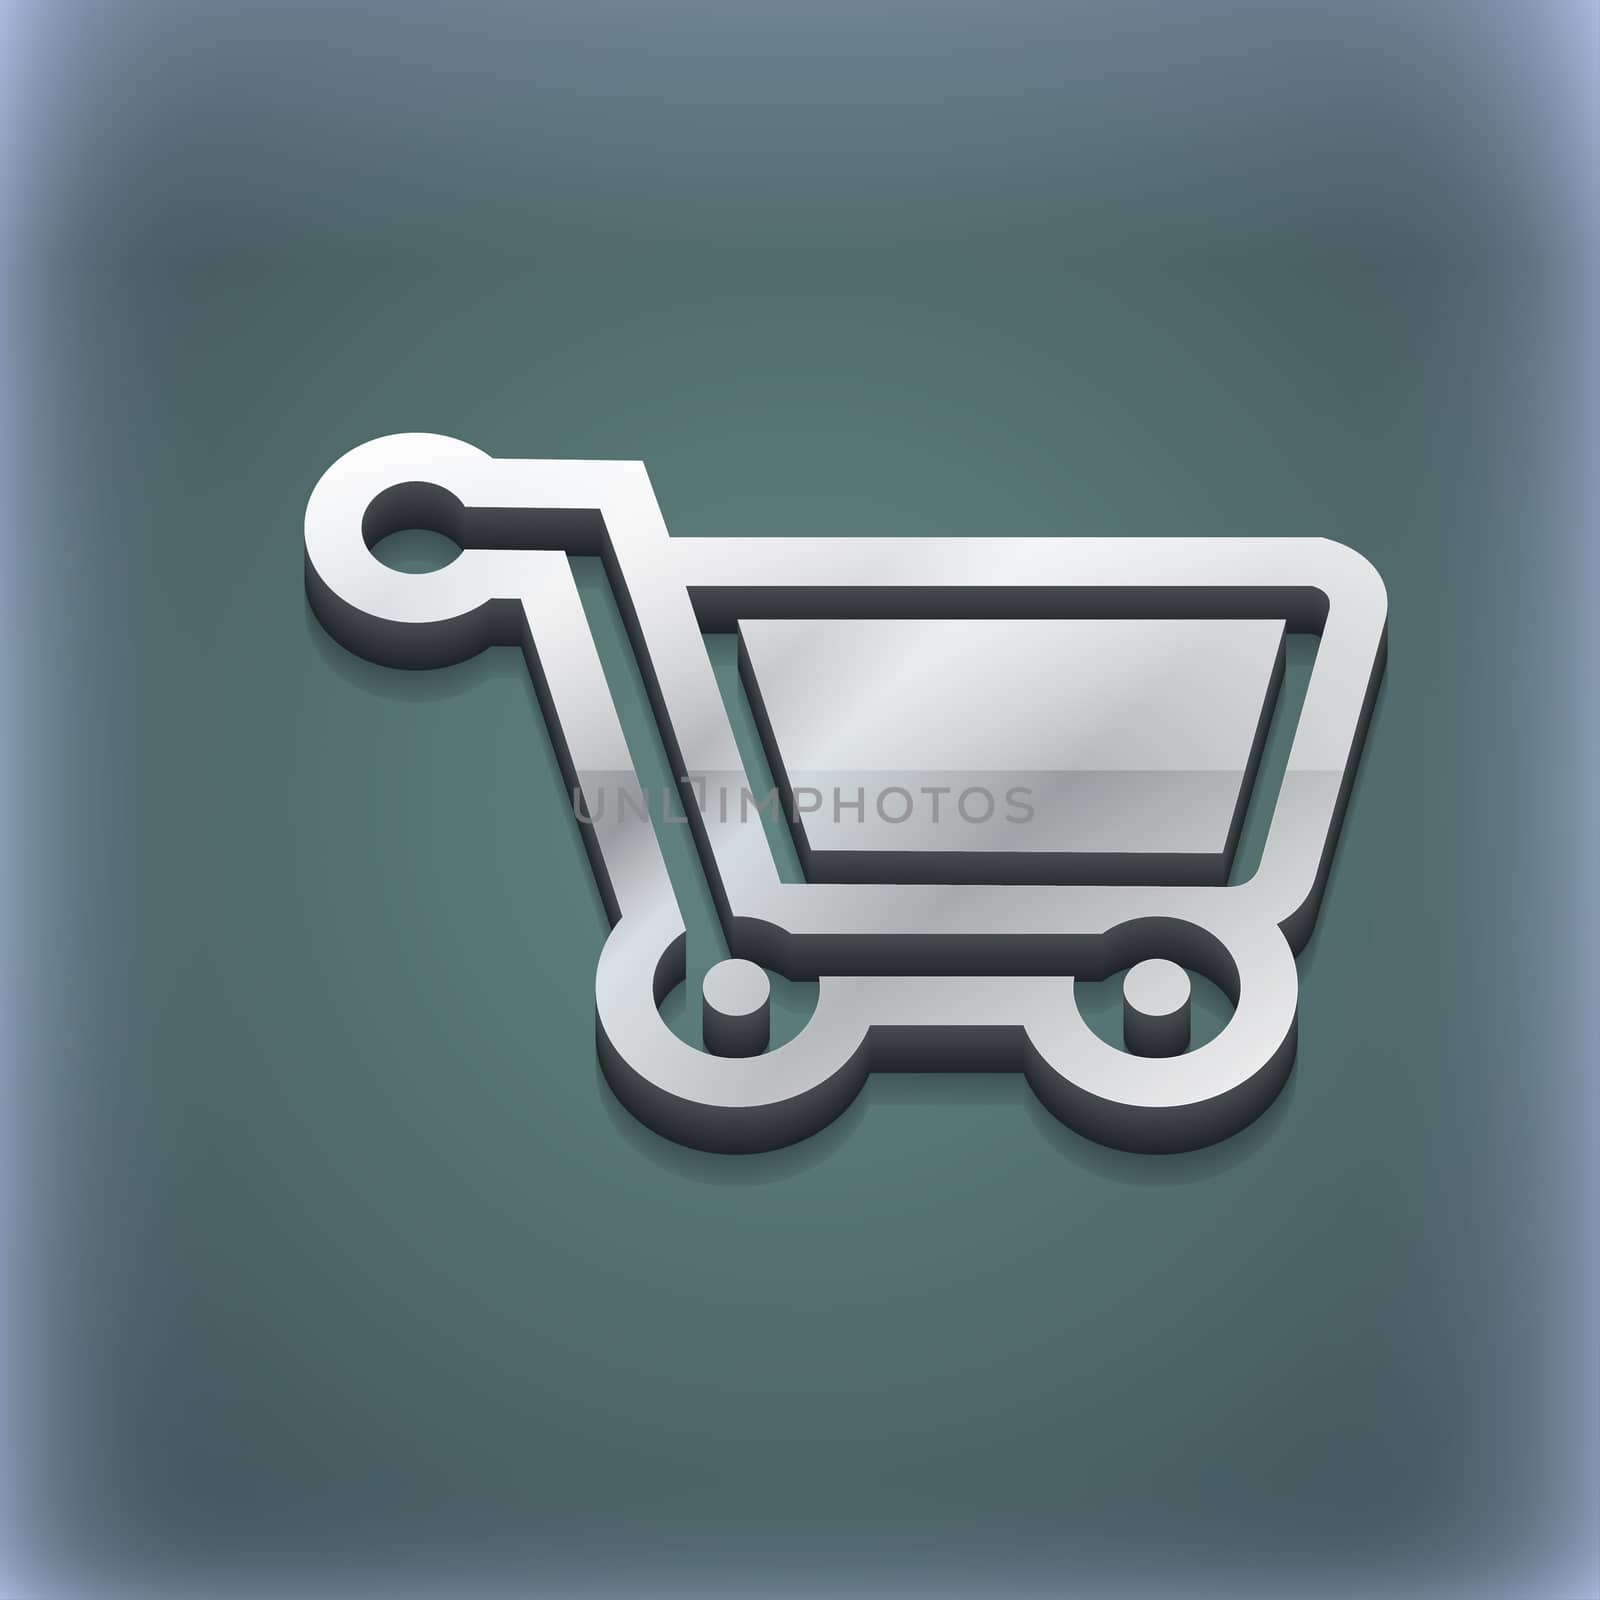 shopping cart icon symbol. 3D style. Trendy, modern design with space for your text illustration. Raster version